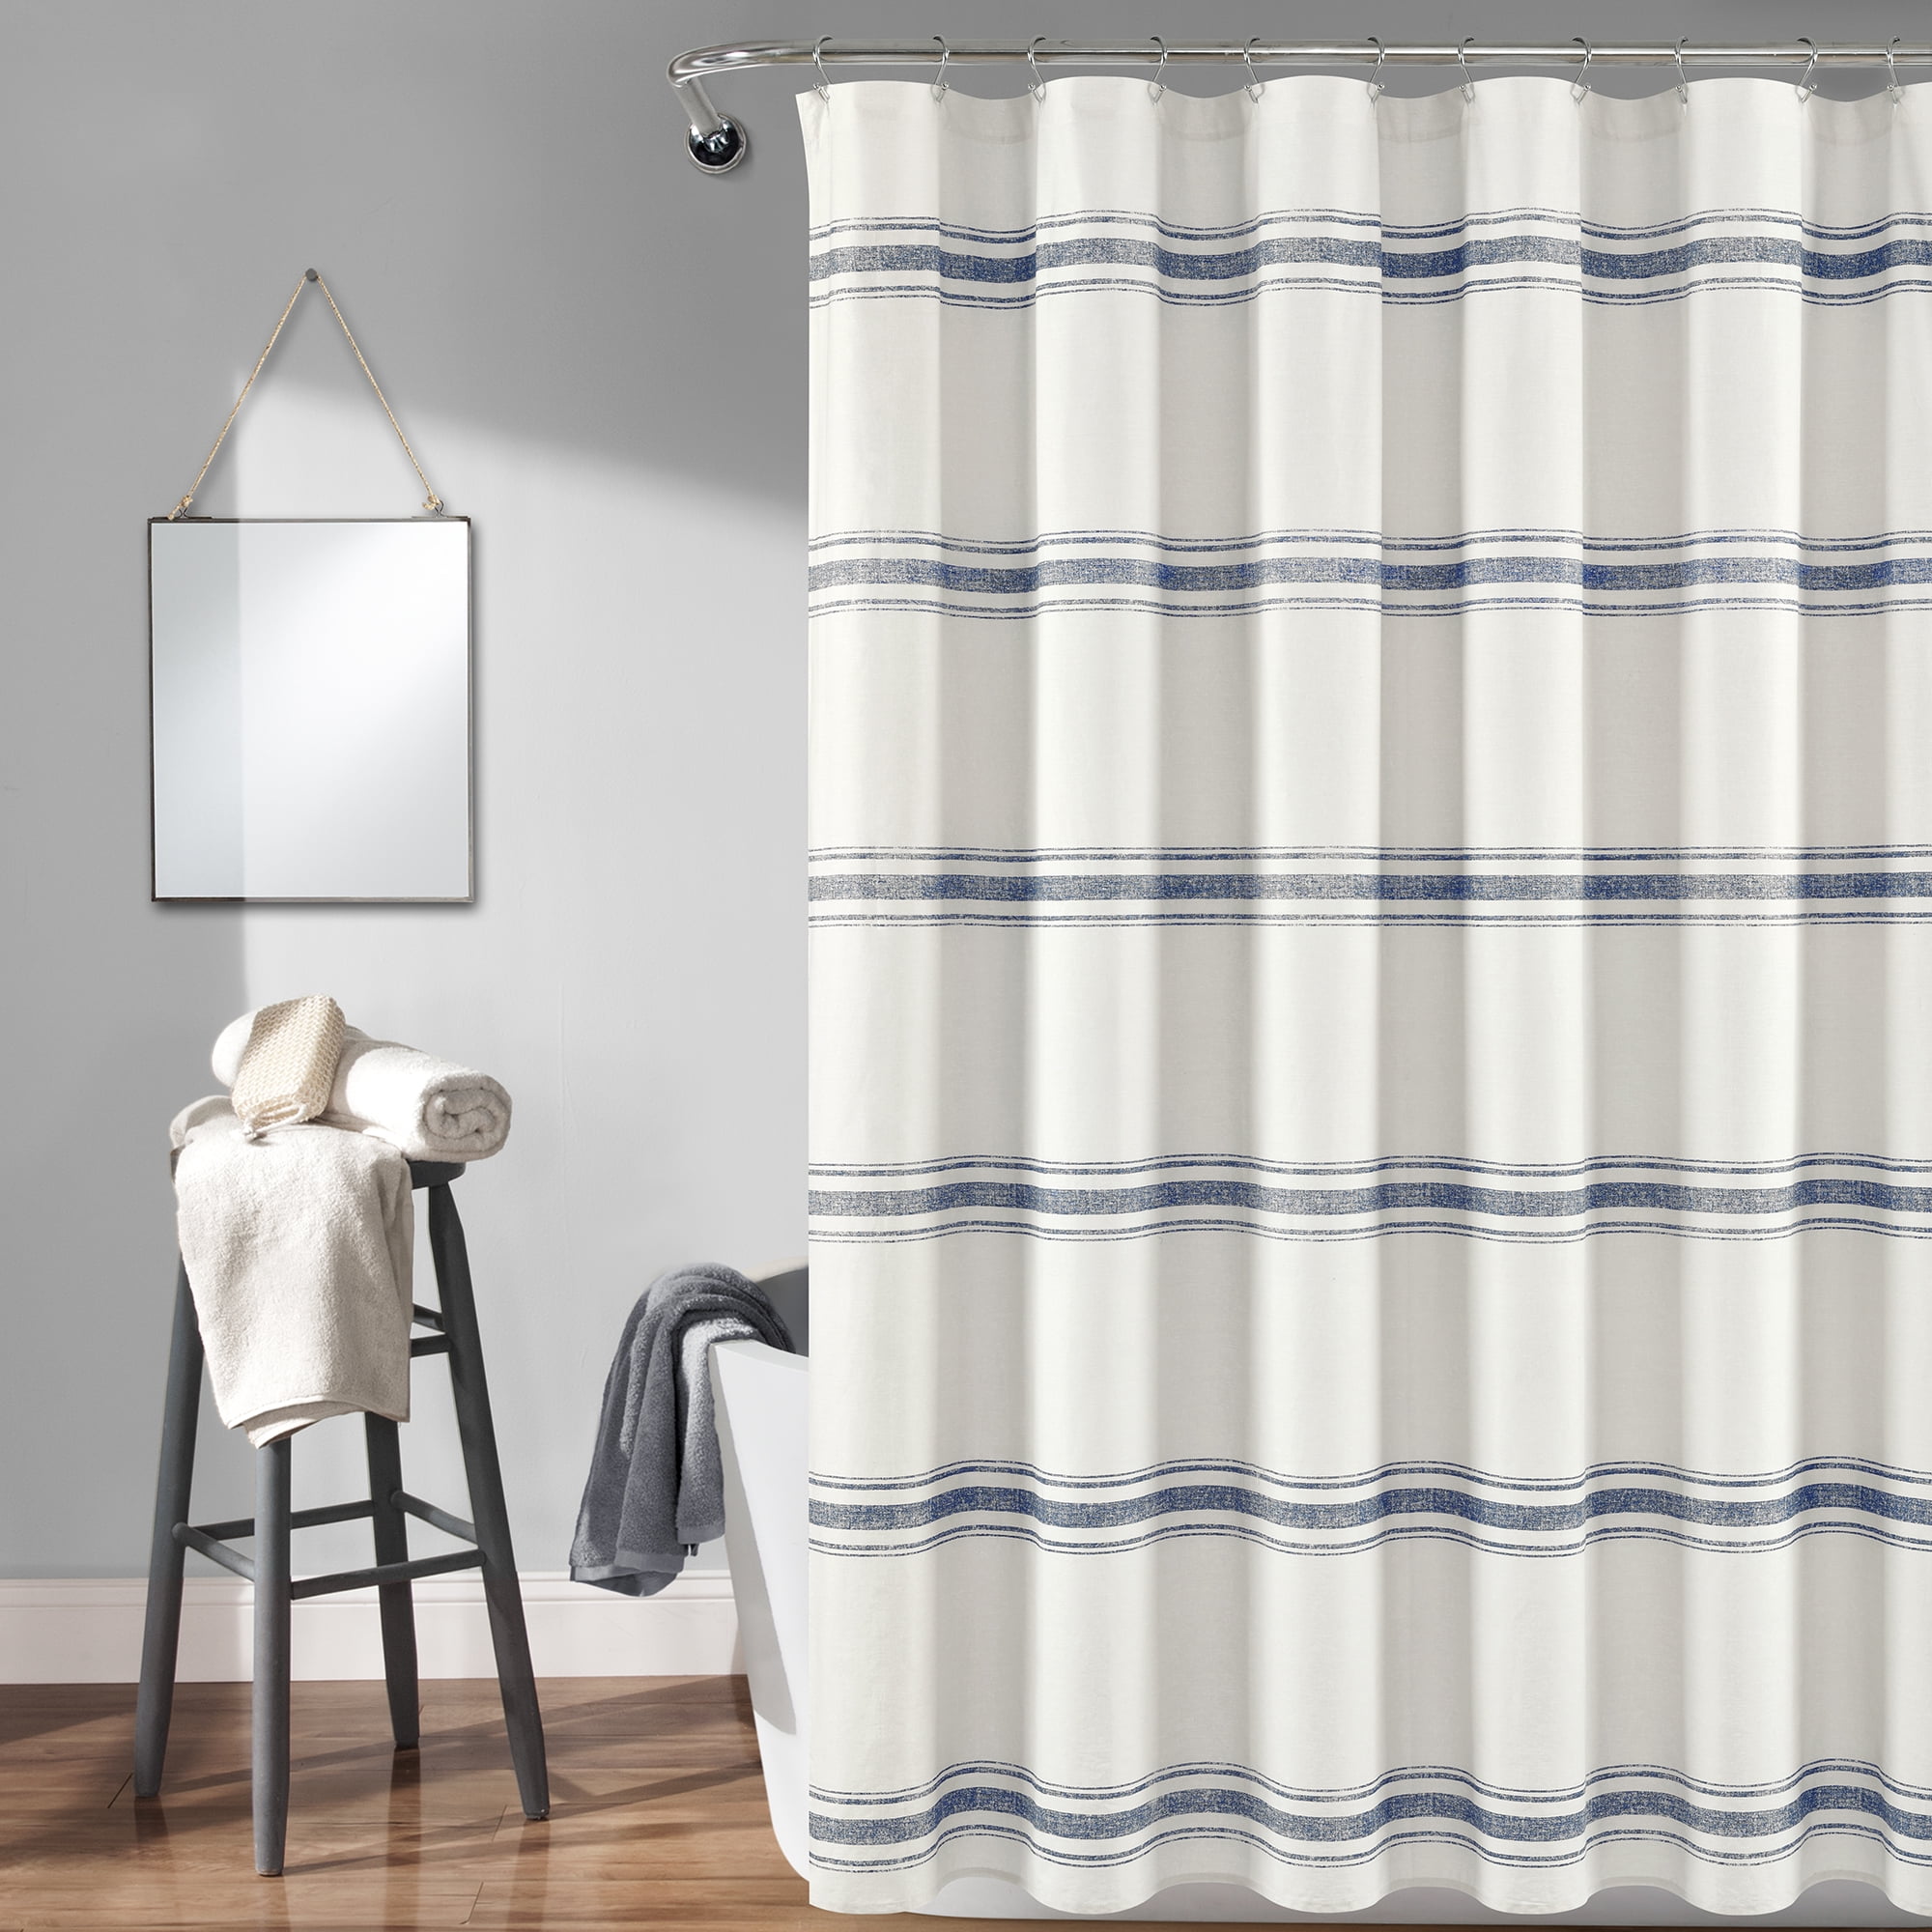 Details about   MAX STUDIO SHOWER CURTAIN ARTISAN STRIPE FLORAL PAISLEY 72” x 72” CHAMBRAY BLUE 